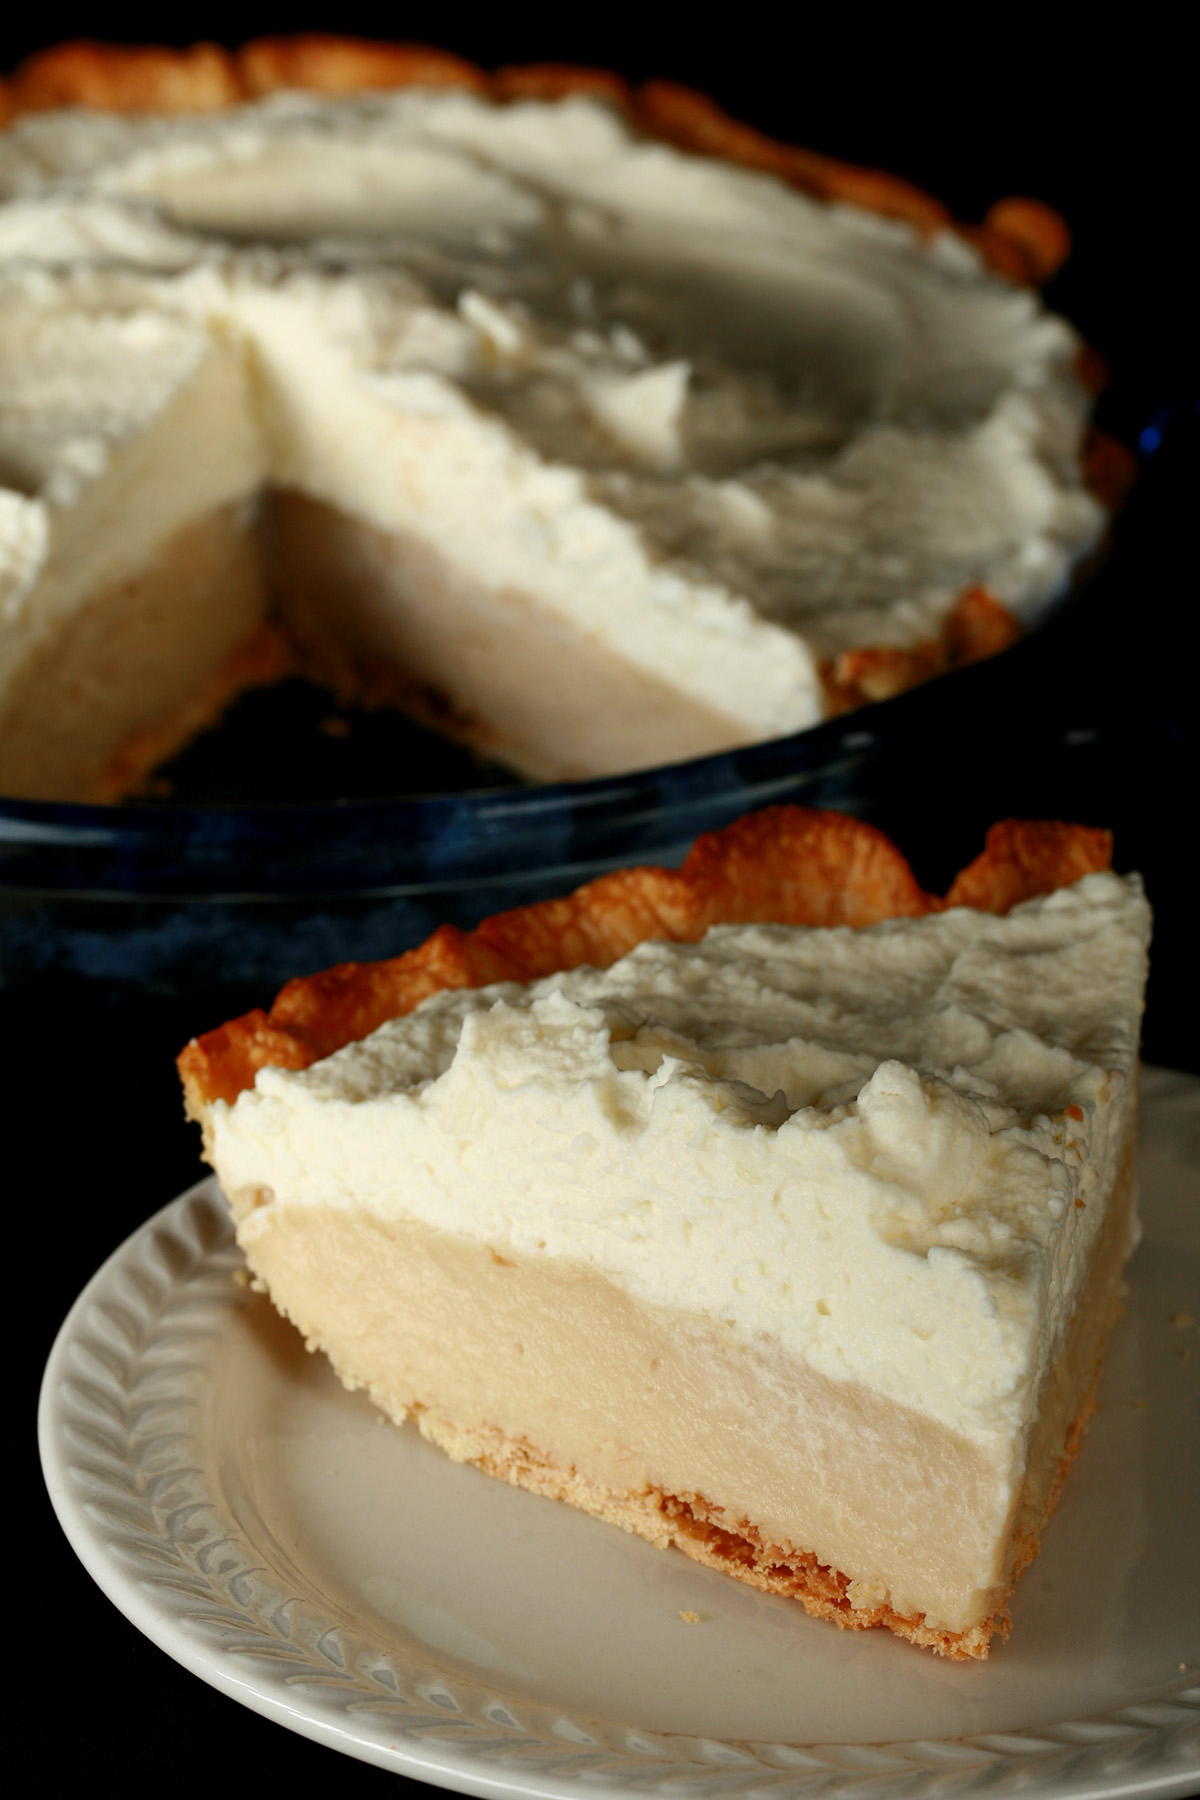 A Gluten-Free Earl Grey Pie - A greige custard pie, topped with whipped cream.